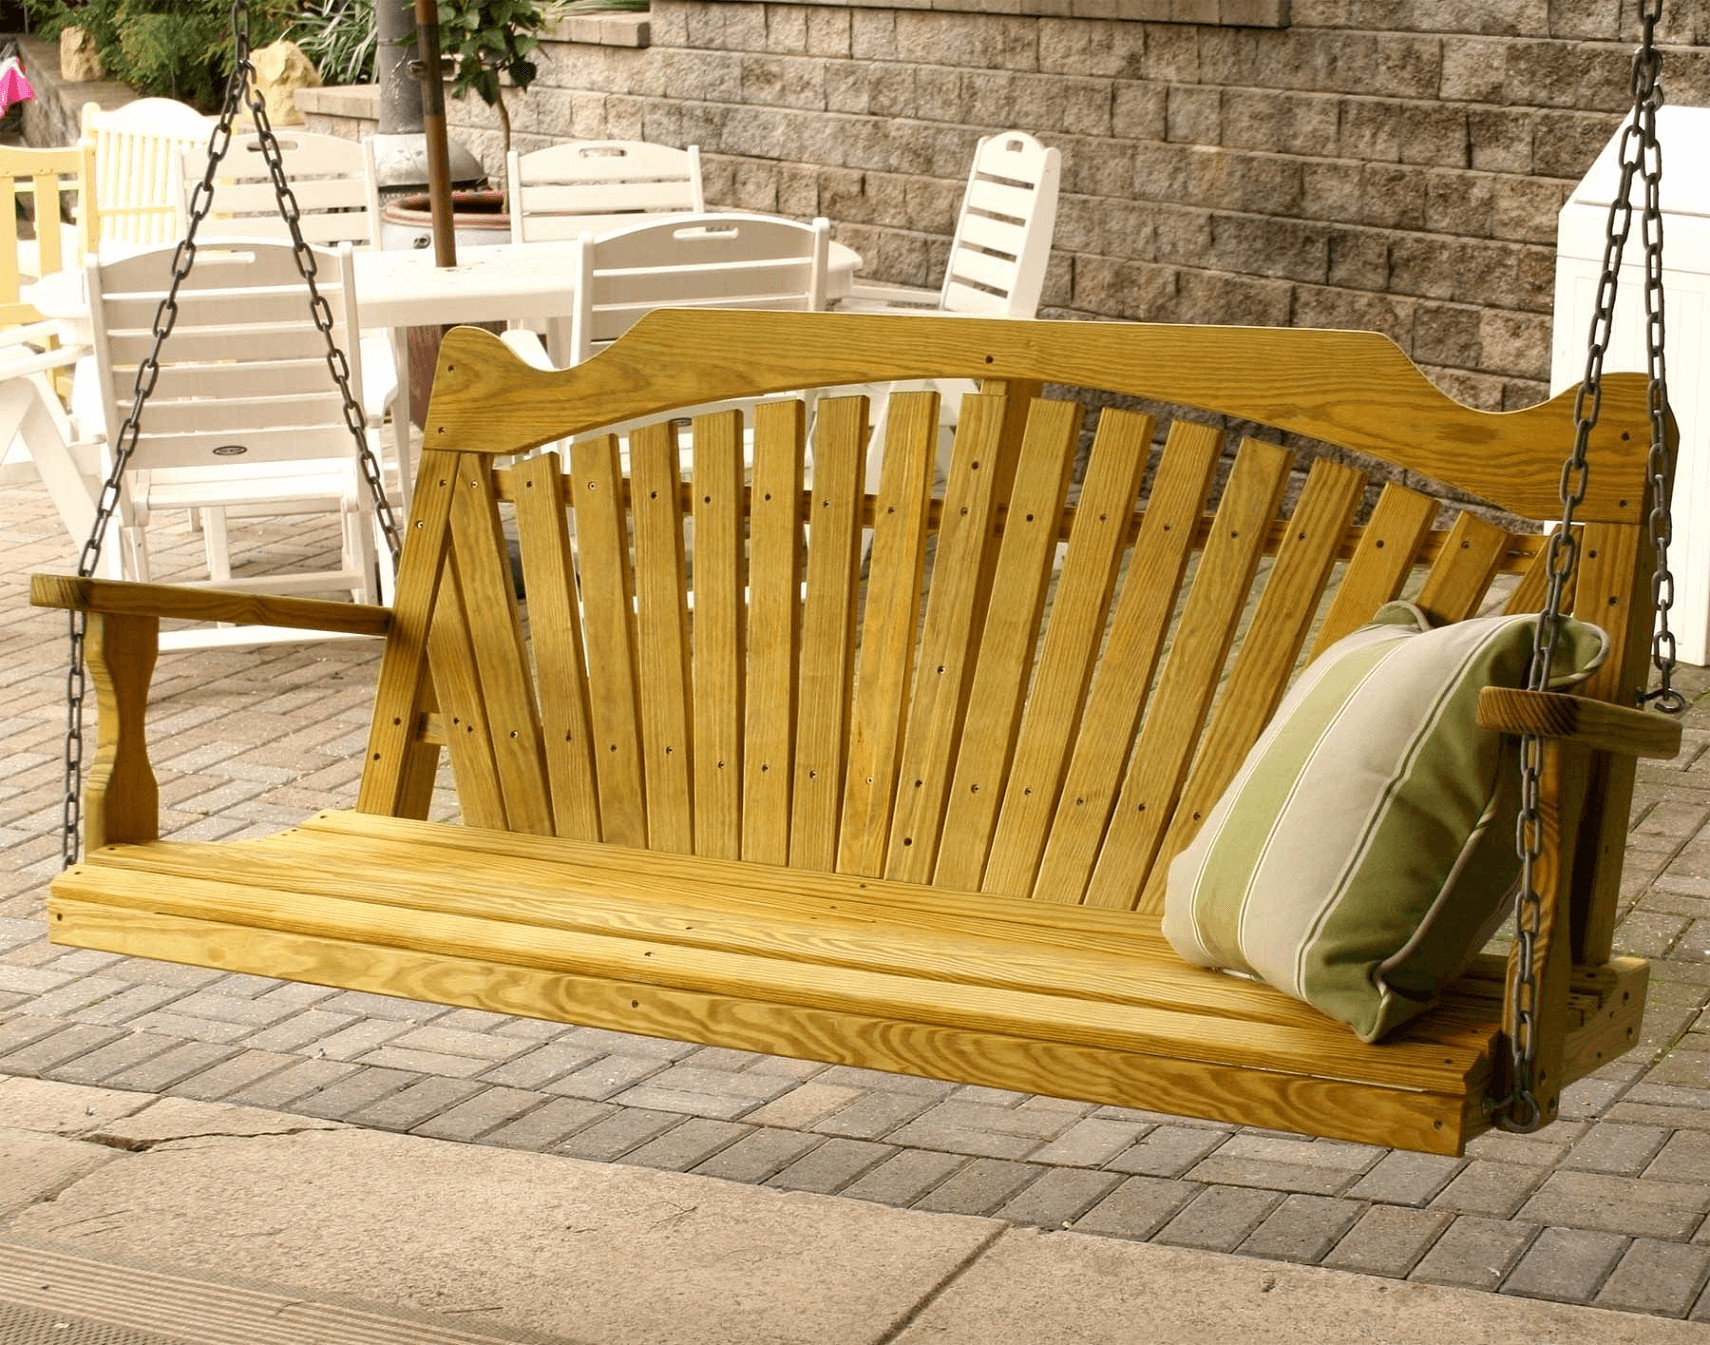 DIY Porch Swing Plans
 Simple Tips to Build DIY Wood Porch Swing Frame Plans